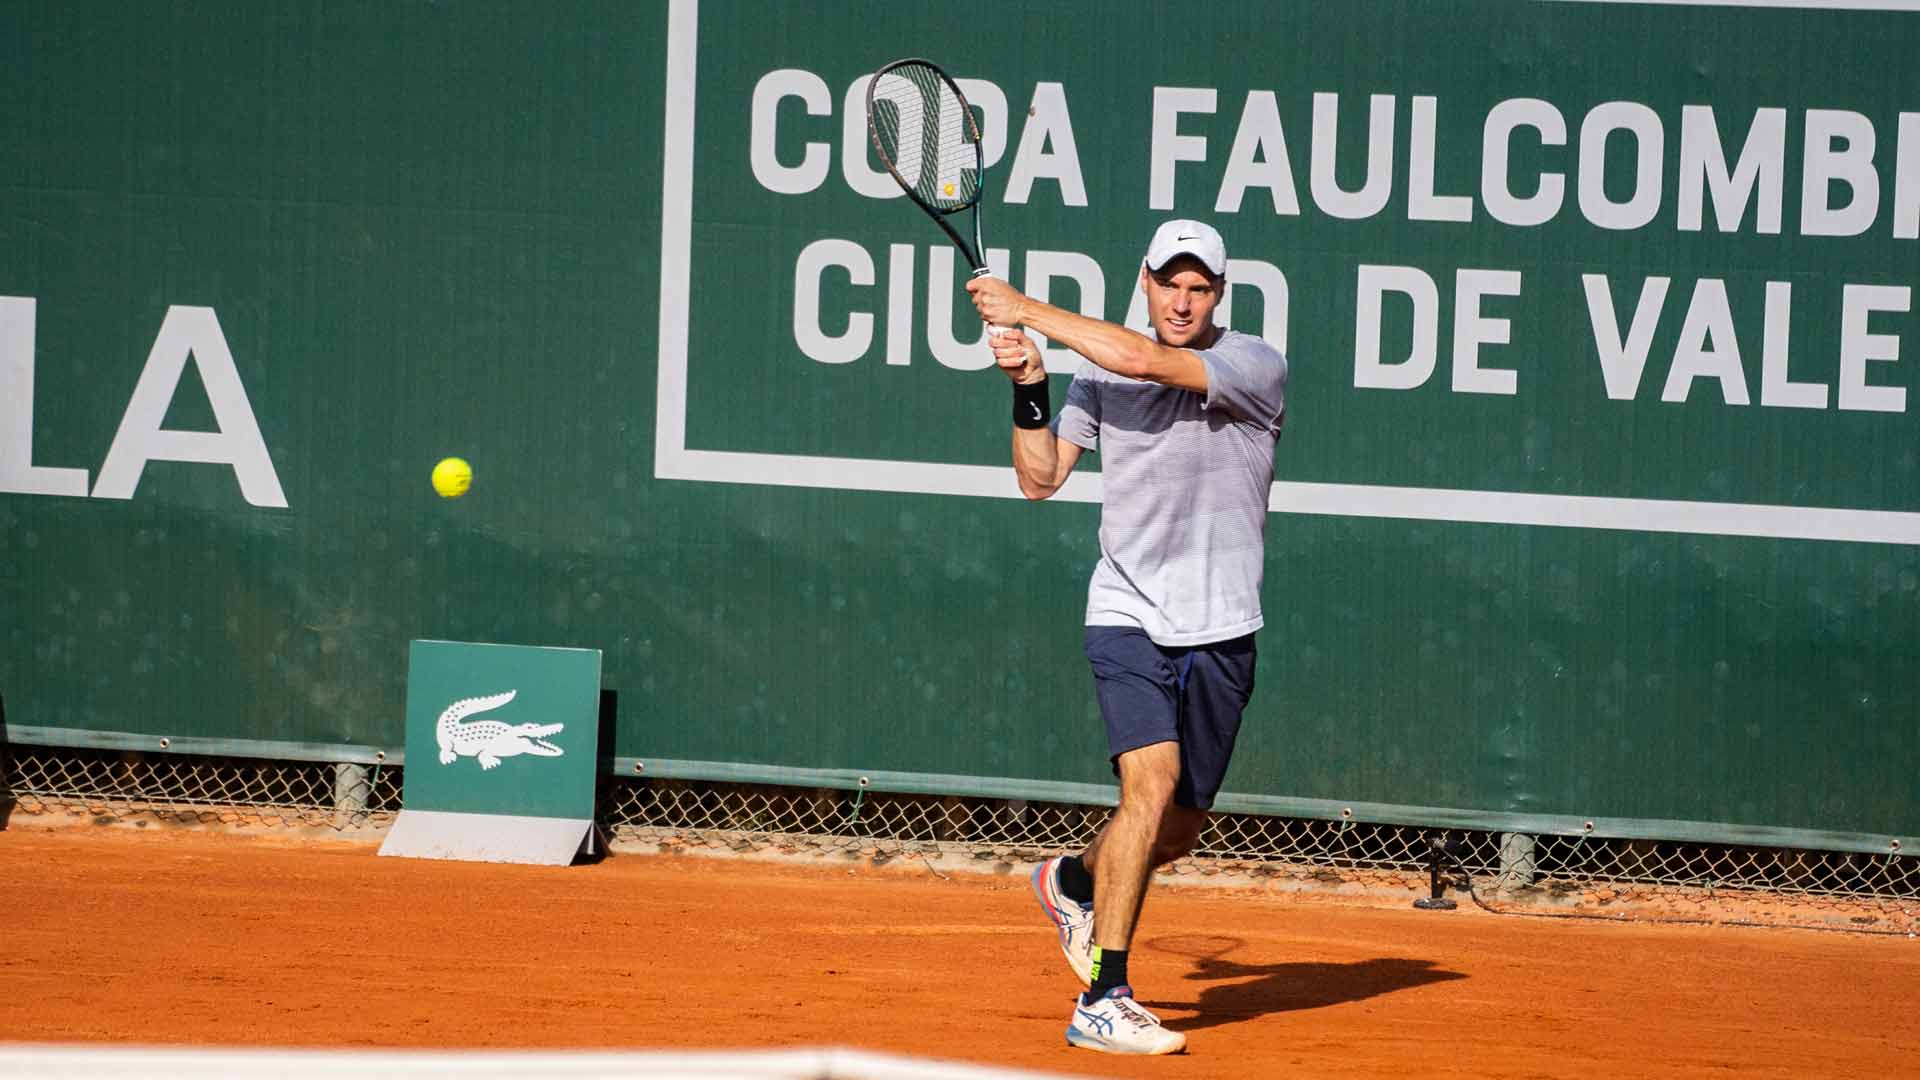 Oleksii Krutykh in action at the 2022 Valencia Challenger.